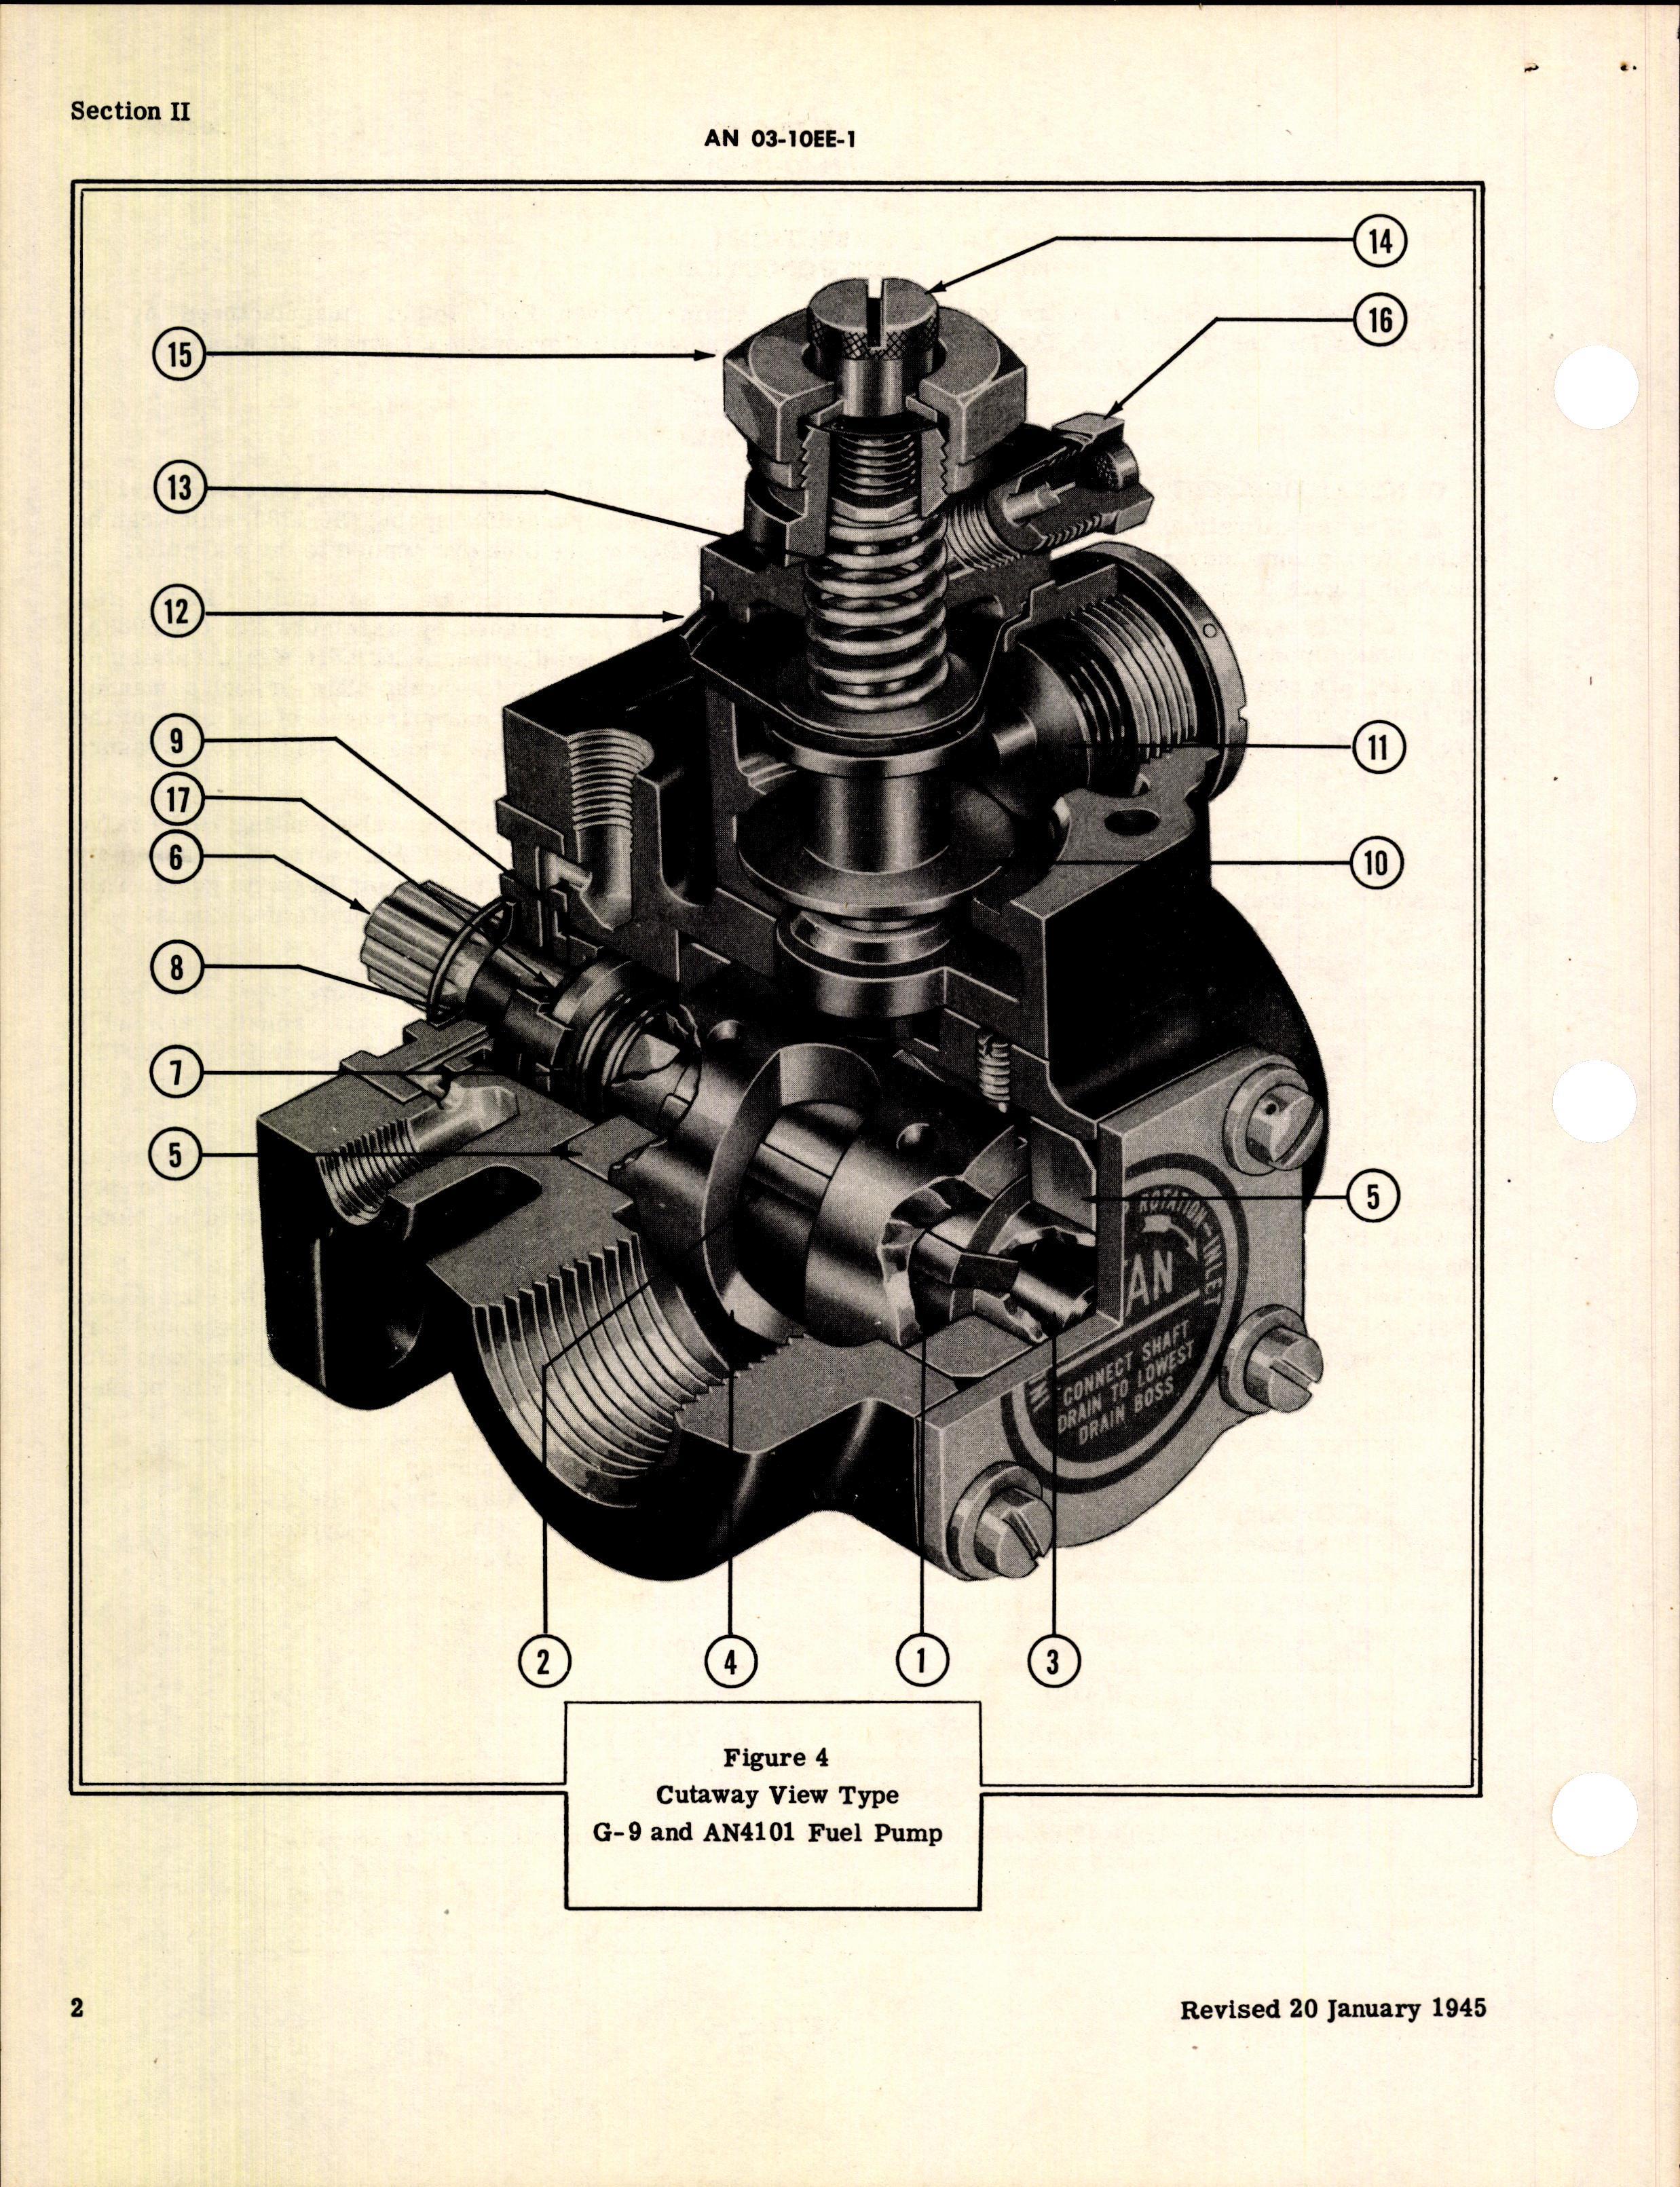 Sample page 6 from AirCorps Library document: Operation, Service, & Overhaul Instructions with Parts Catalog for Engine-Driven Fuel Pumps